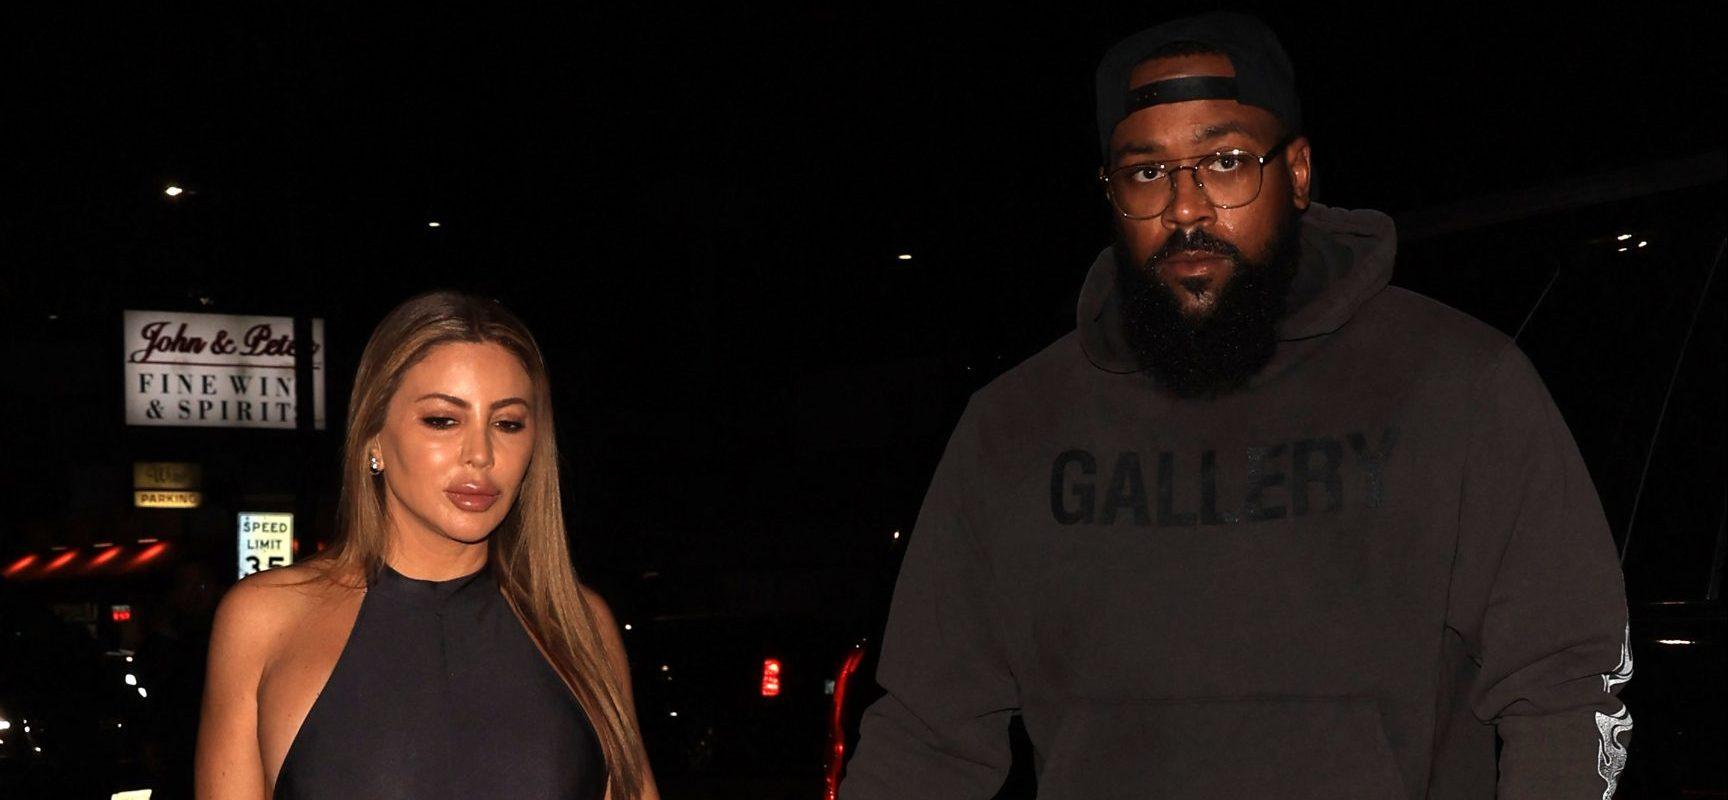 Larsa Pippen & Marcus Jordan Address Backlash Over Their 16-Year Age Gap Romance: ‘Age Is Just A Number’